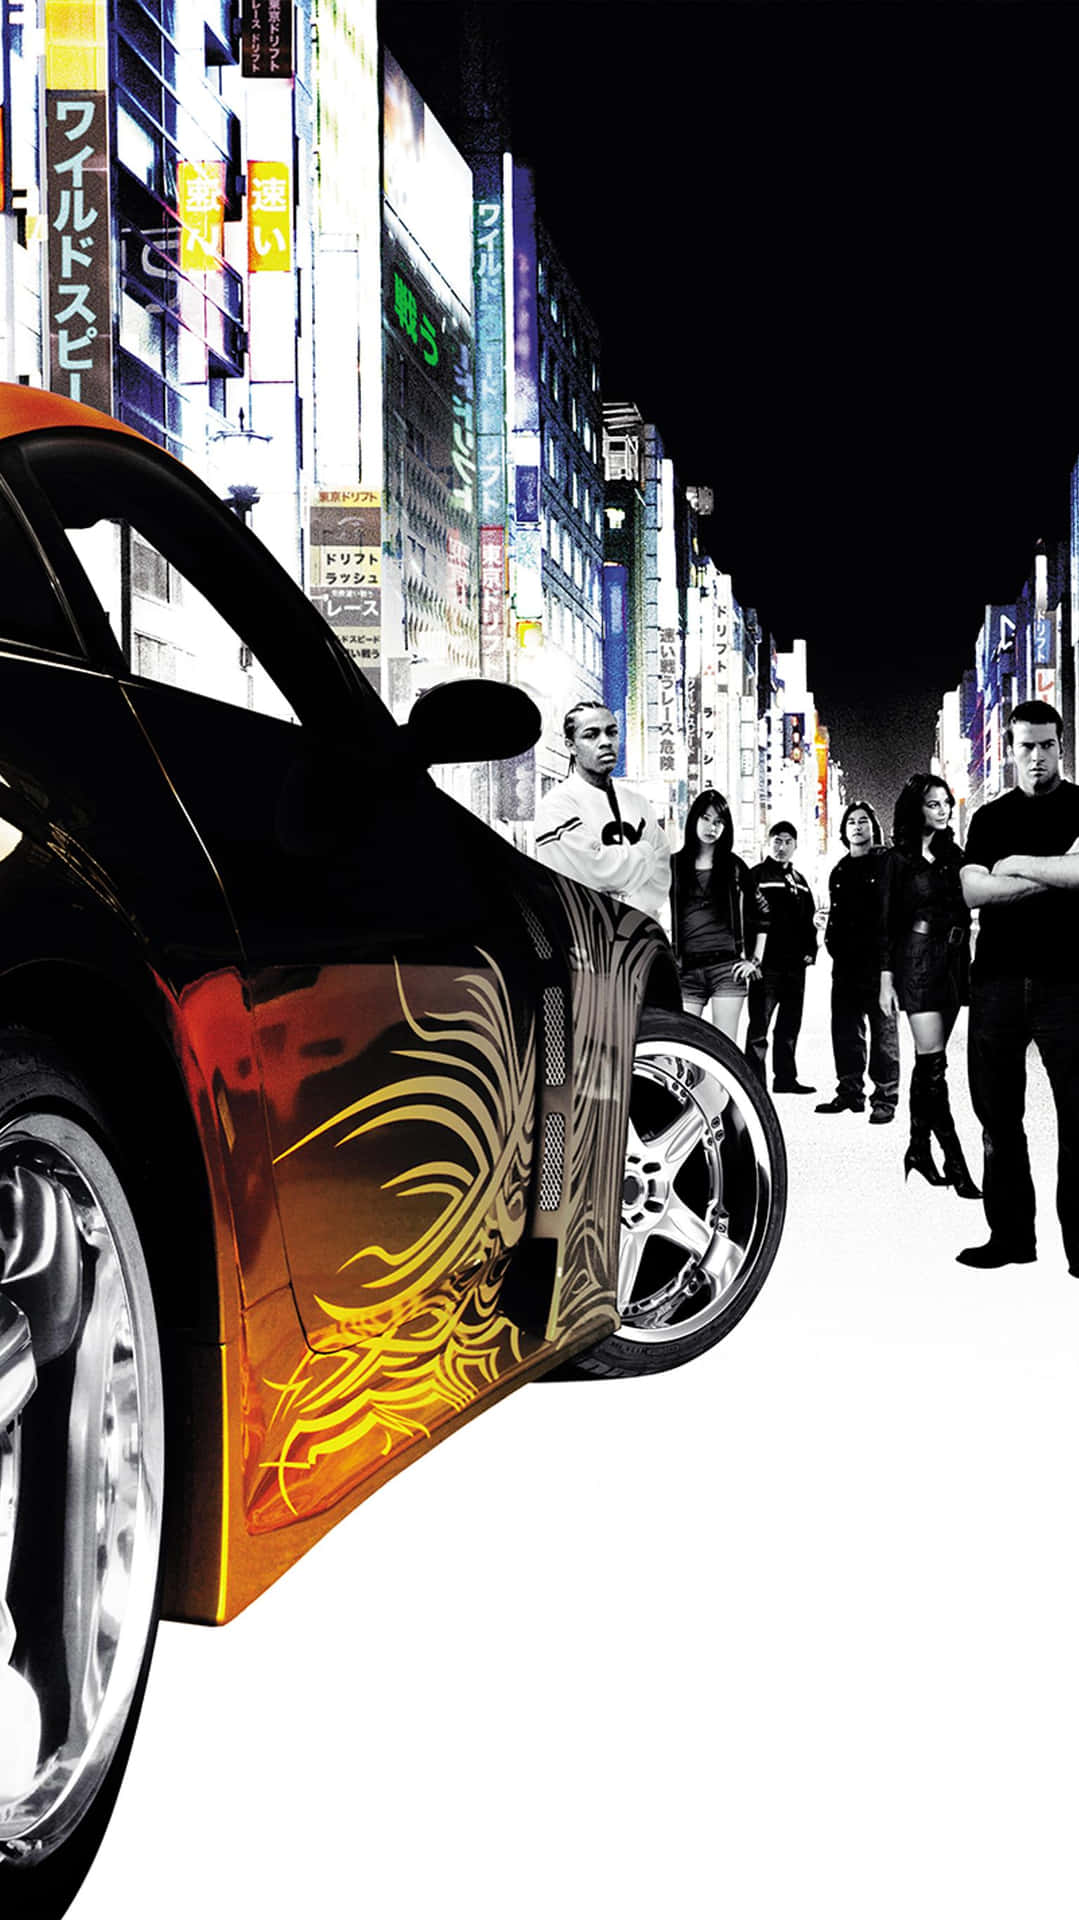 Get the Perfect Fast And Furious-Themed Iphone Wallpaper